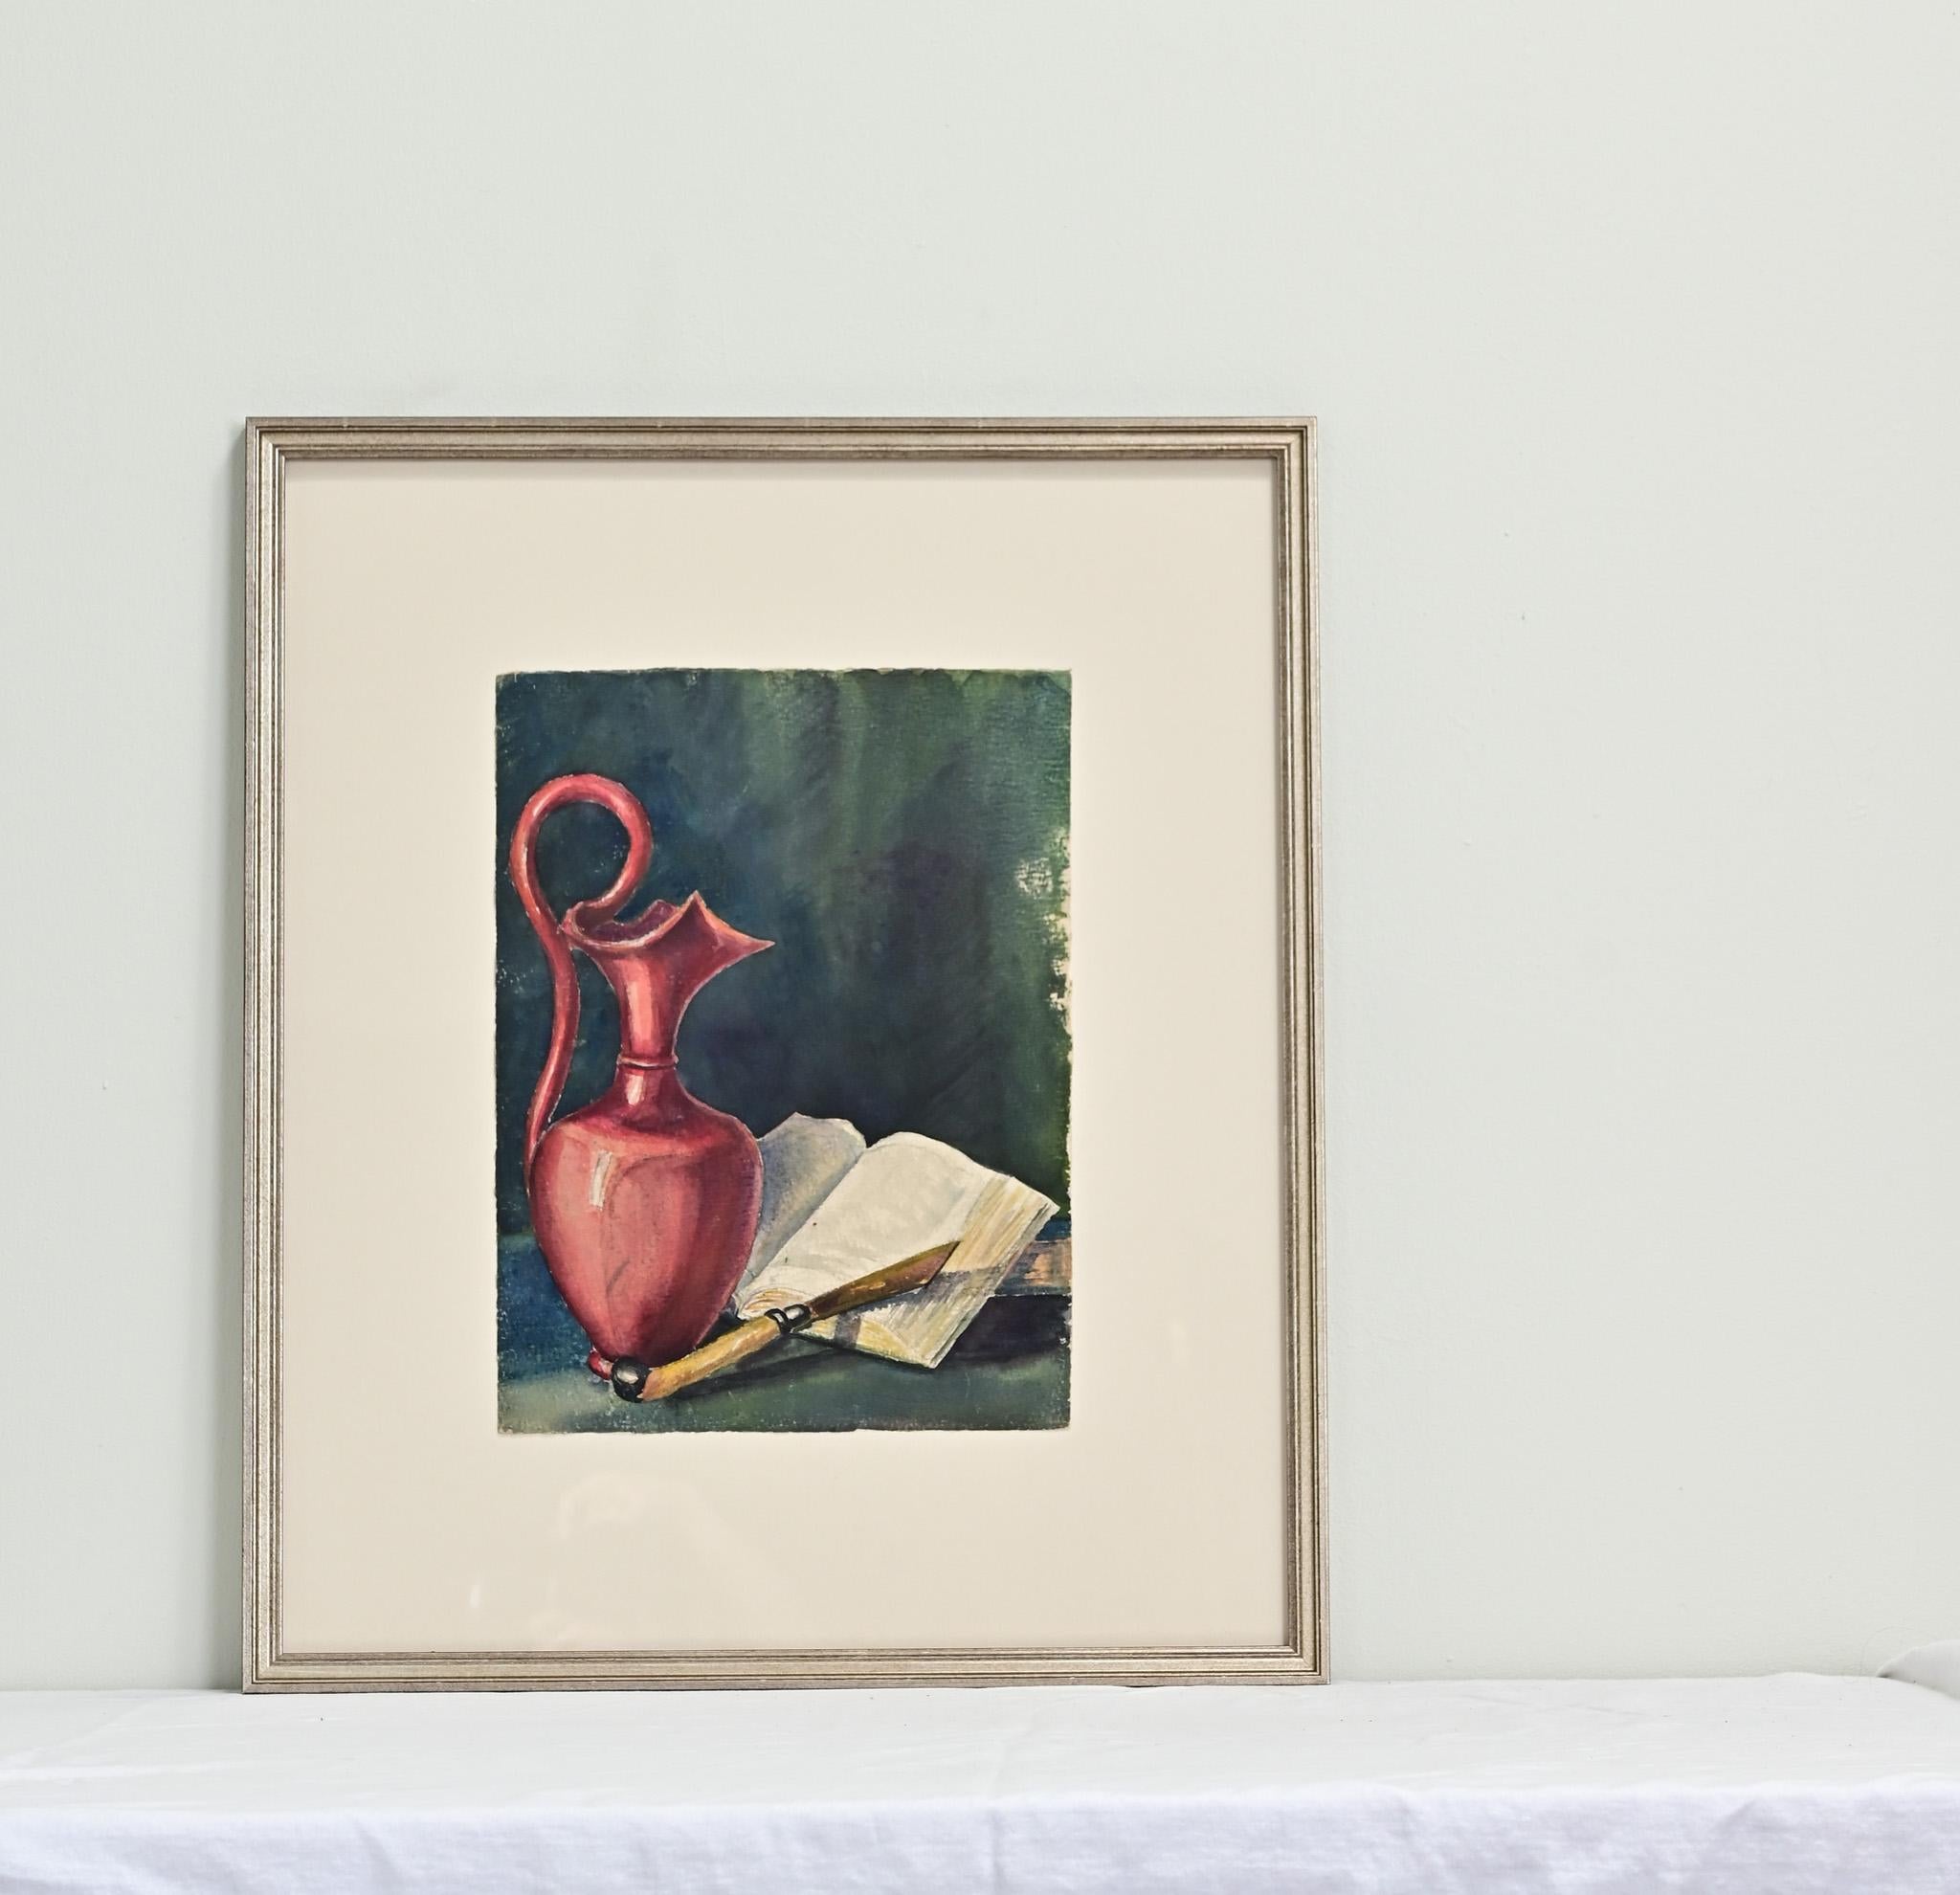 A vintage still life painting, watercolor on paper. This painting has recently been matted and framed in a silver finished frame. New conservation grade UV protective glass. Be sure to view the detailed images.